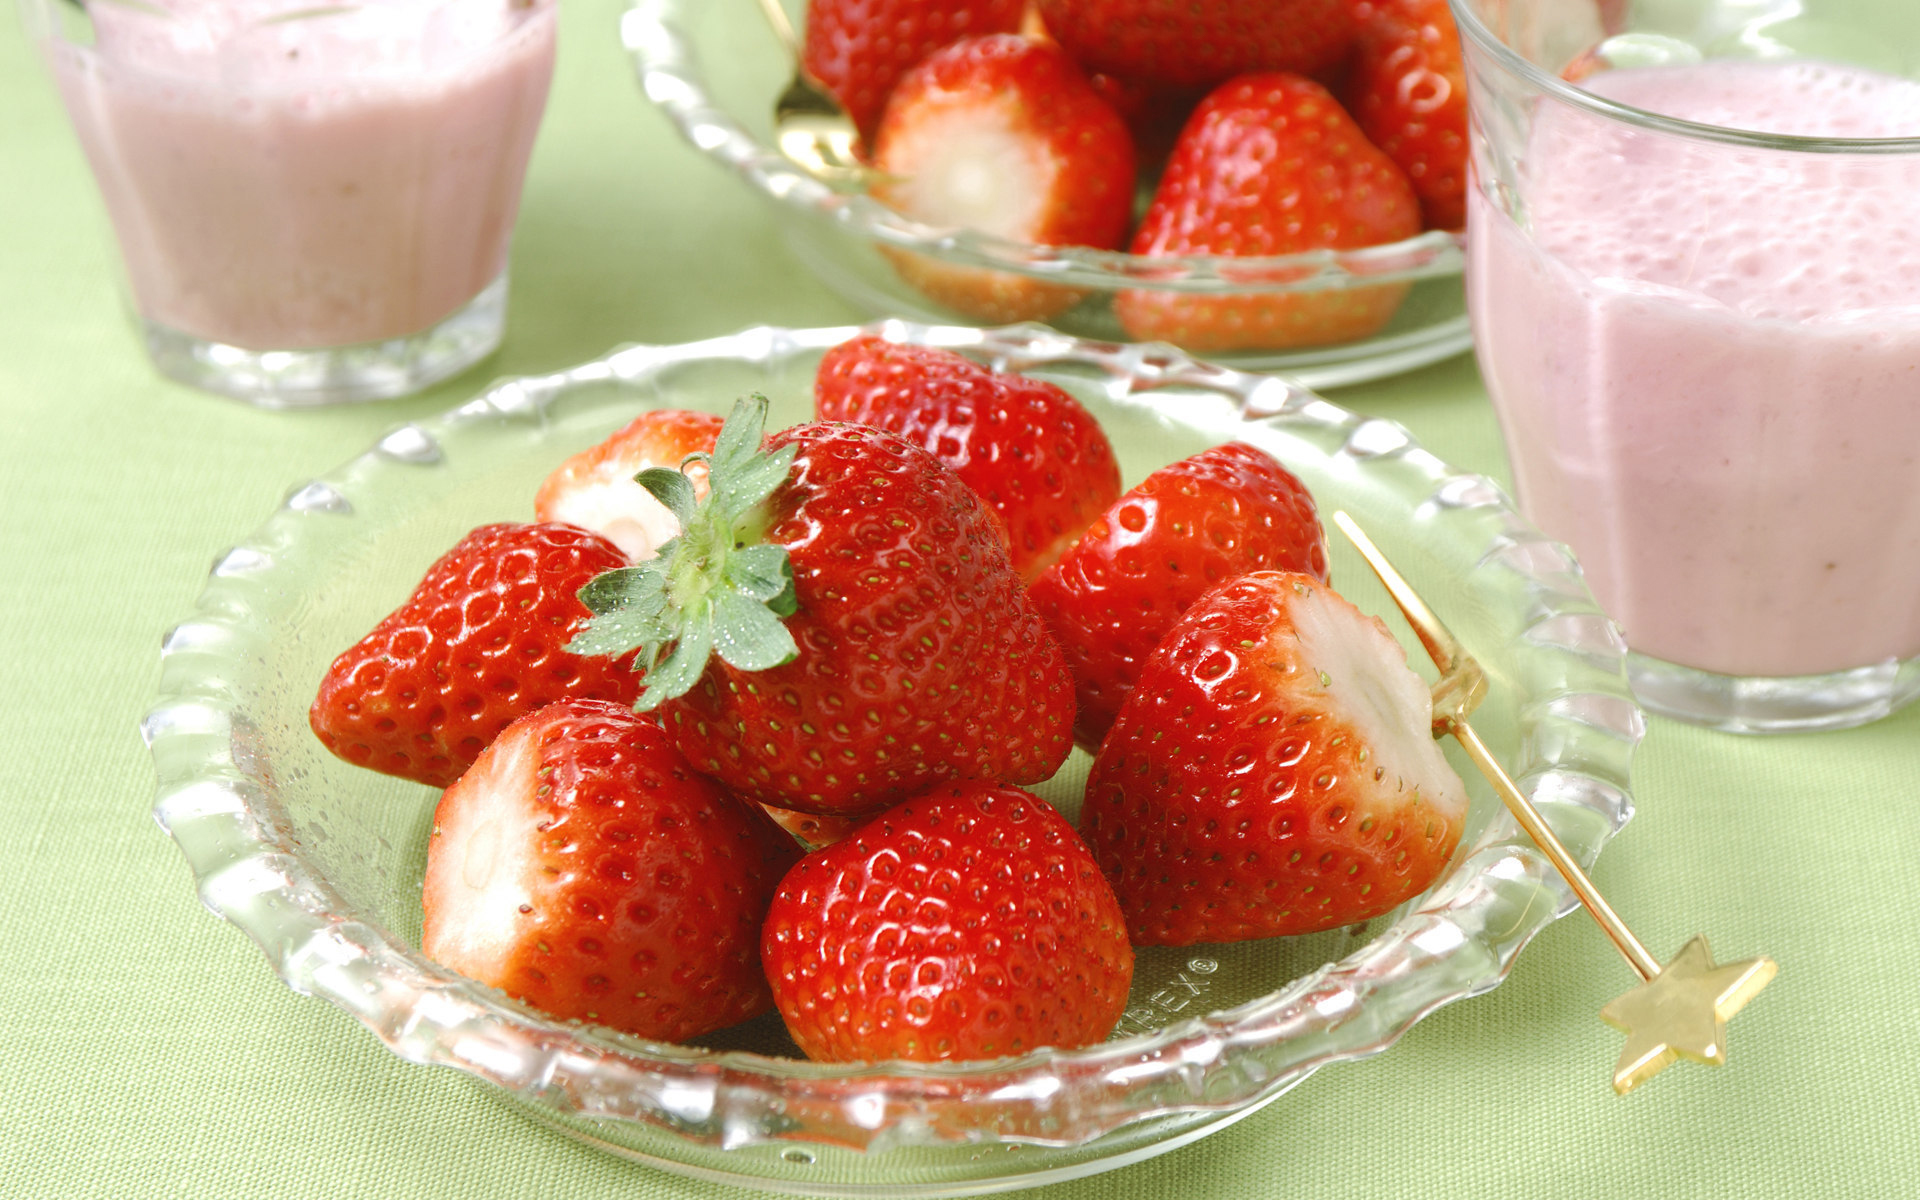 Wallpapers plate strawberry meal on the desktop